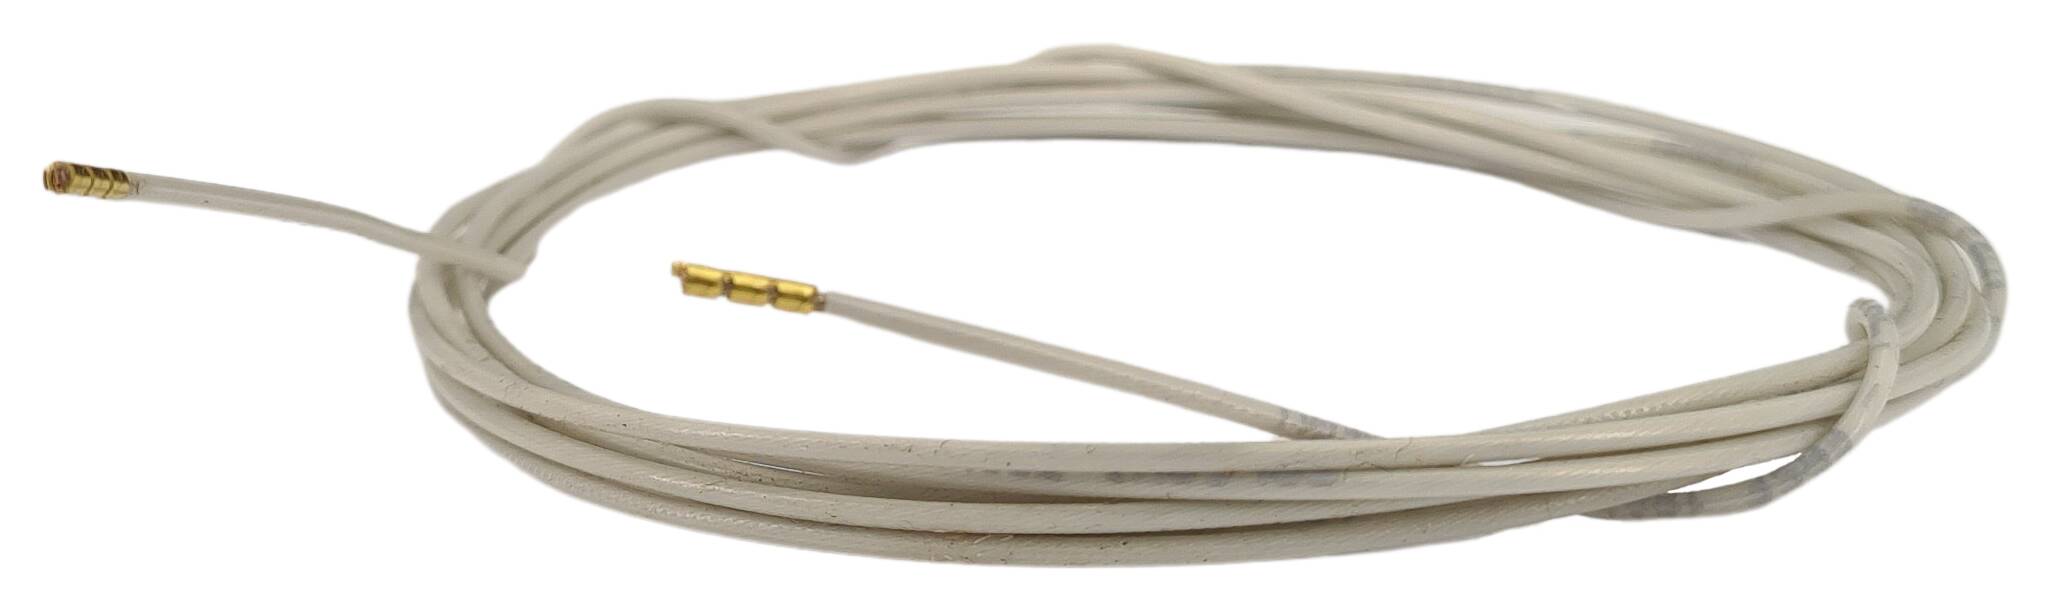 Teflon strand cable-section 1x0,75 FEP 2000 mm long both sides ferruled endswhite